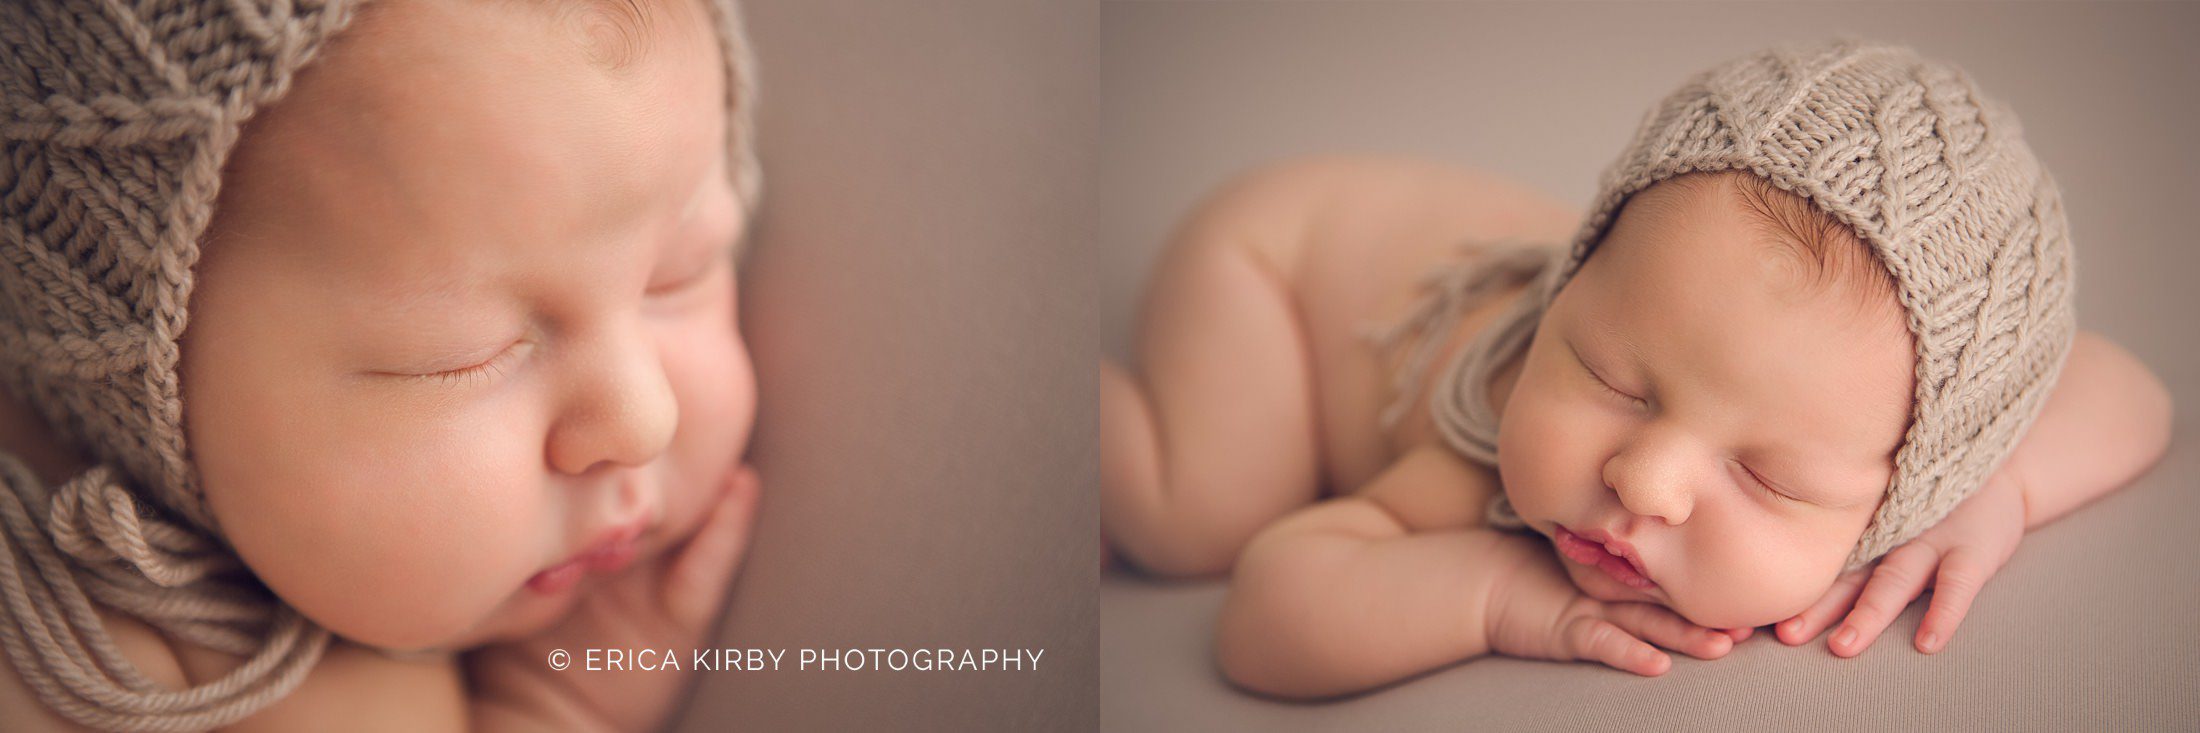 Rogers AR Newborn Baby Photographer | baby boy newborn photo session in northwest arkansas light and airy neutral colors | Erica Kirby Photography